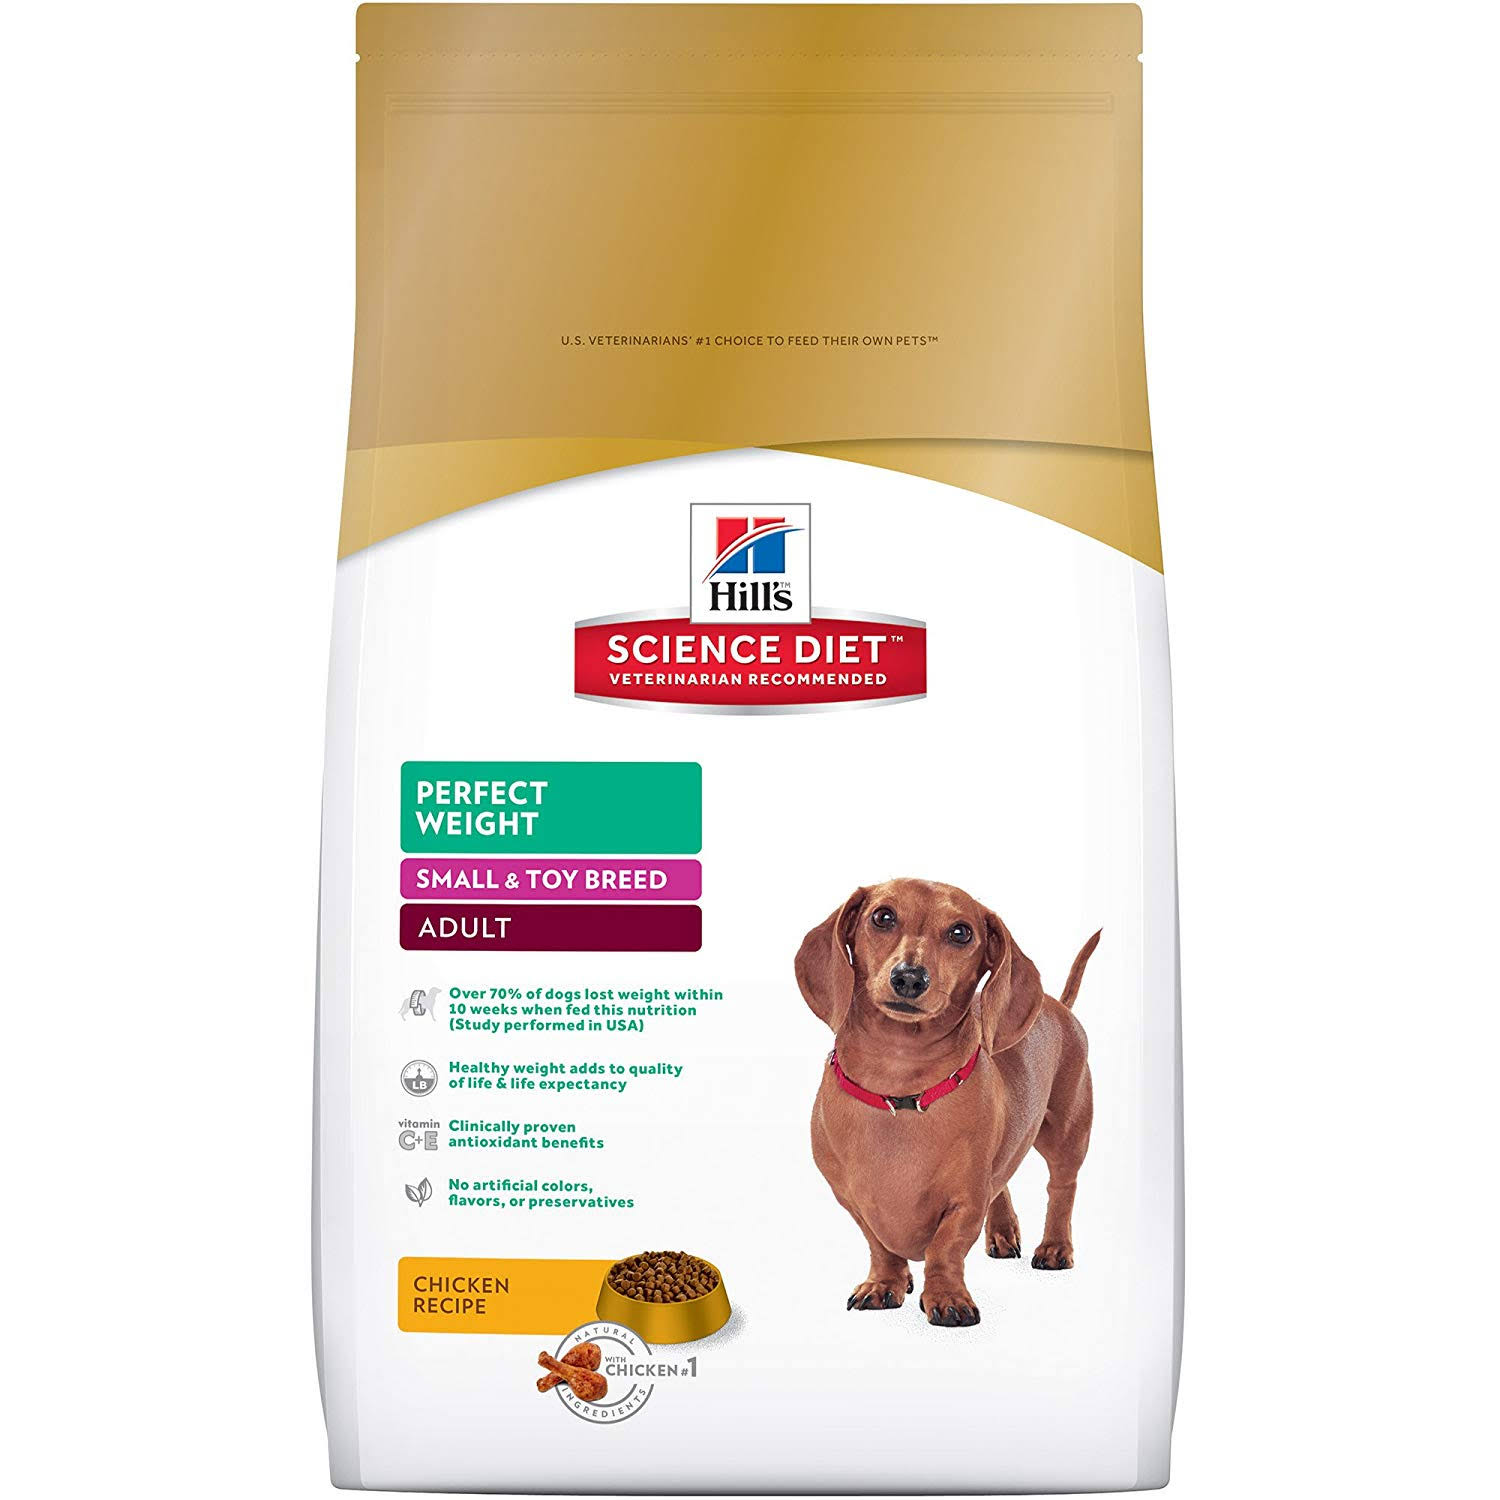 Hill's Science Diet Small & Toy Breed Premium Natural Dog Food - Chicken Recipe, 4lb bag